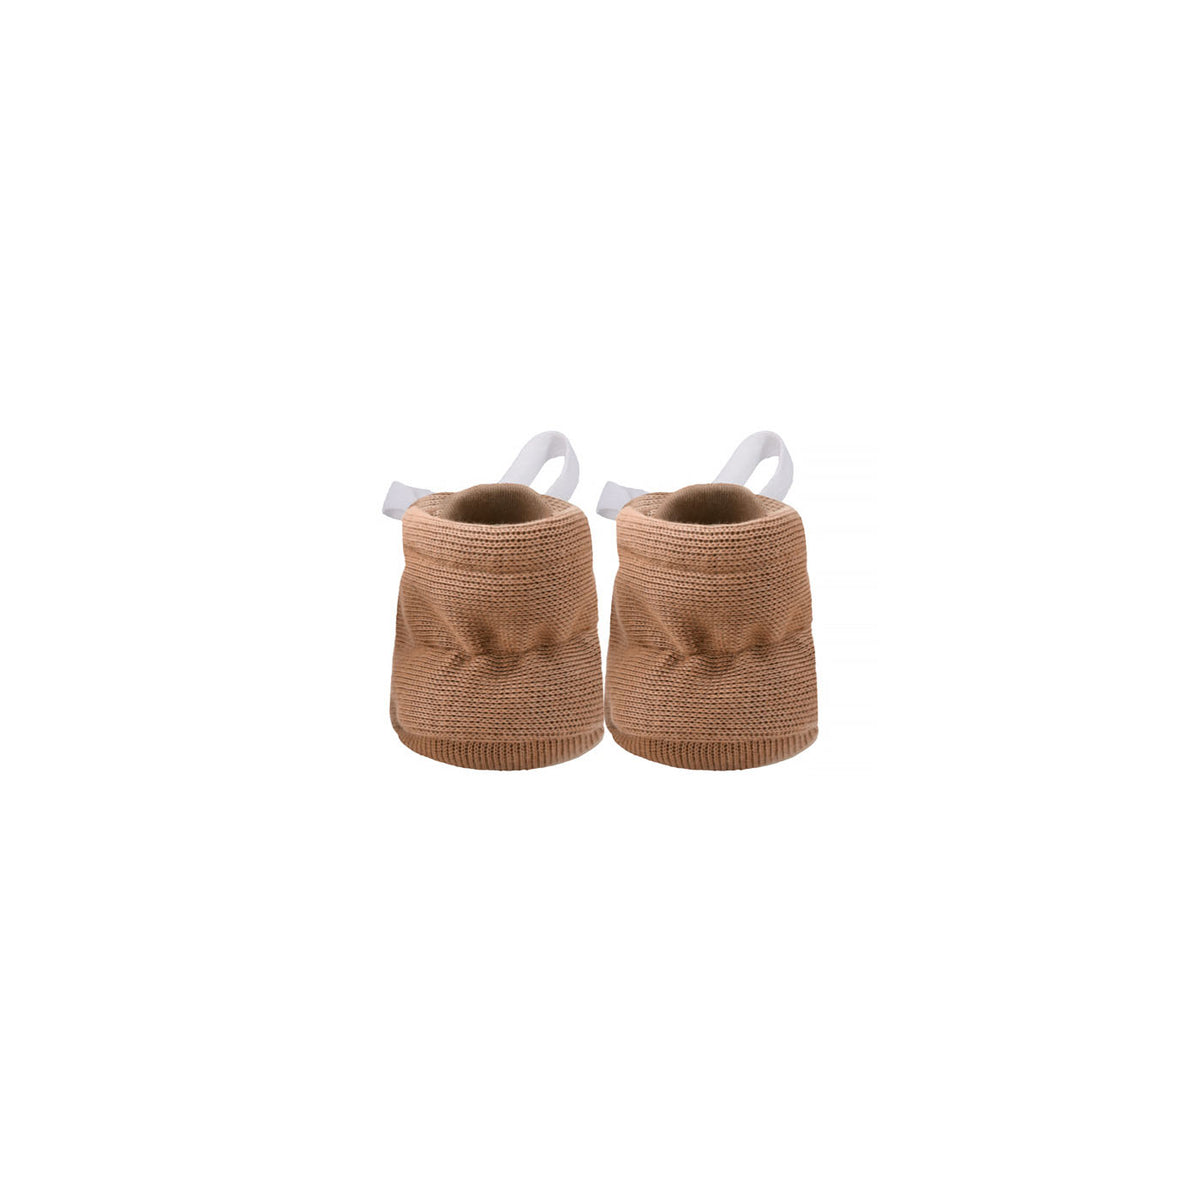 uaua baby booties in chocolate back view